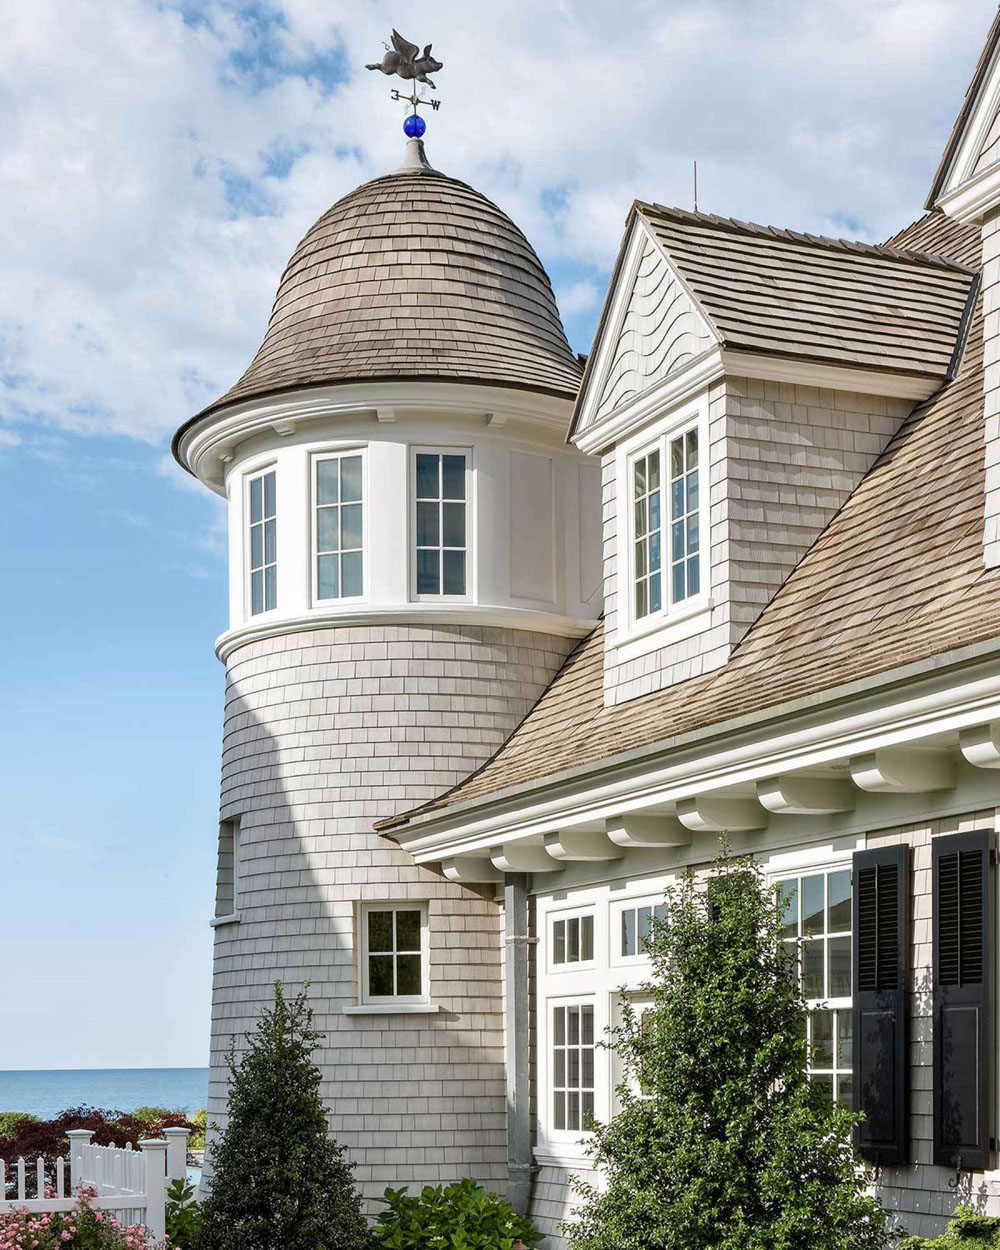 Guesthouse with a Round Lighthouse Tower Design